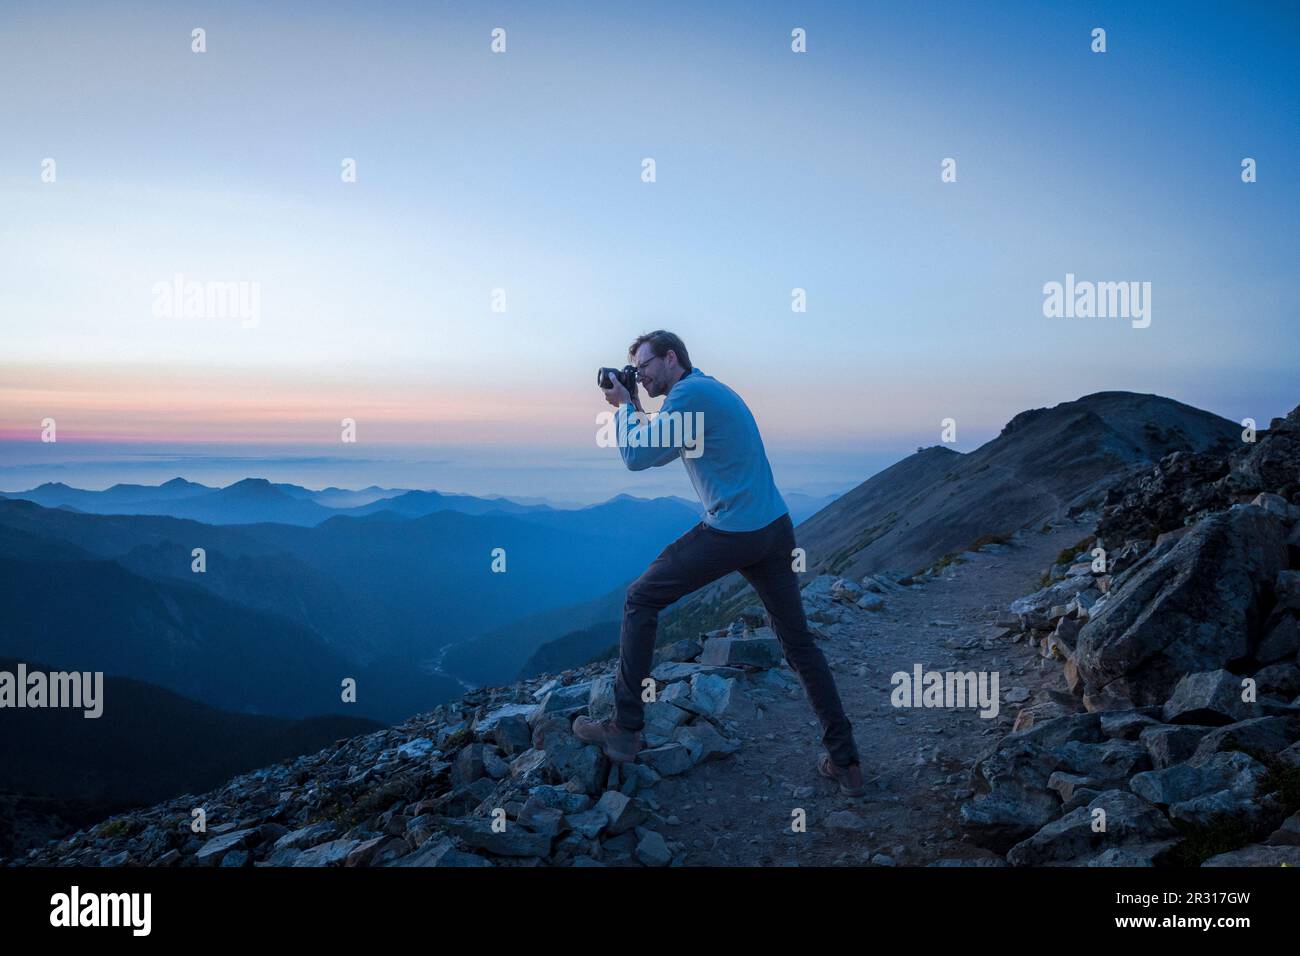 A Man is Taking Pictures of Evening Mountains in Mt. Rainier NP Stock Photo